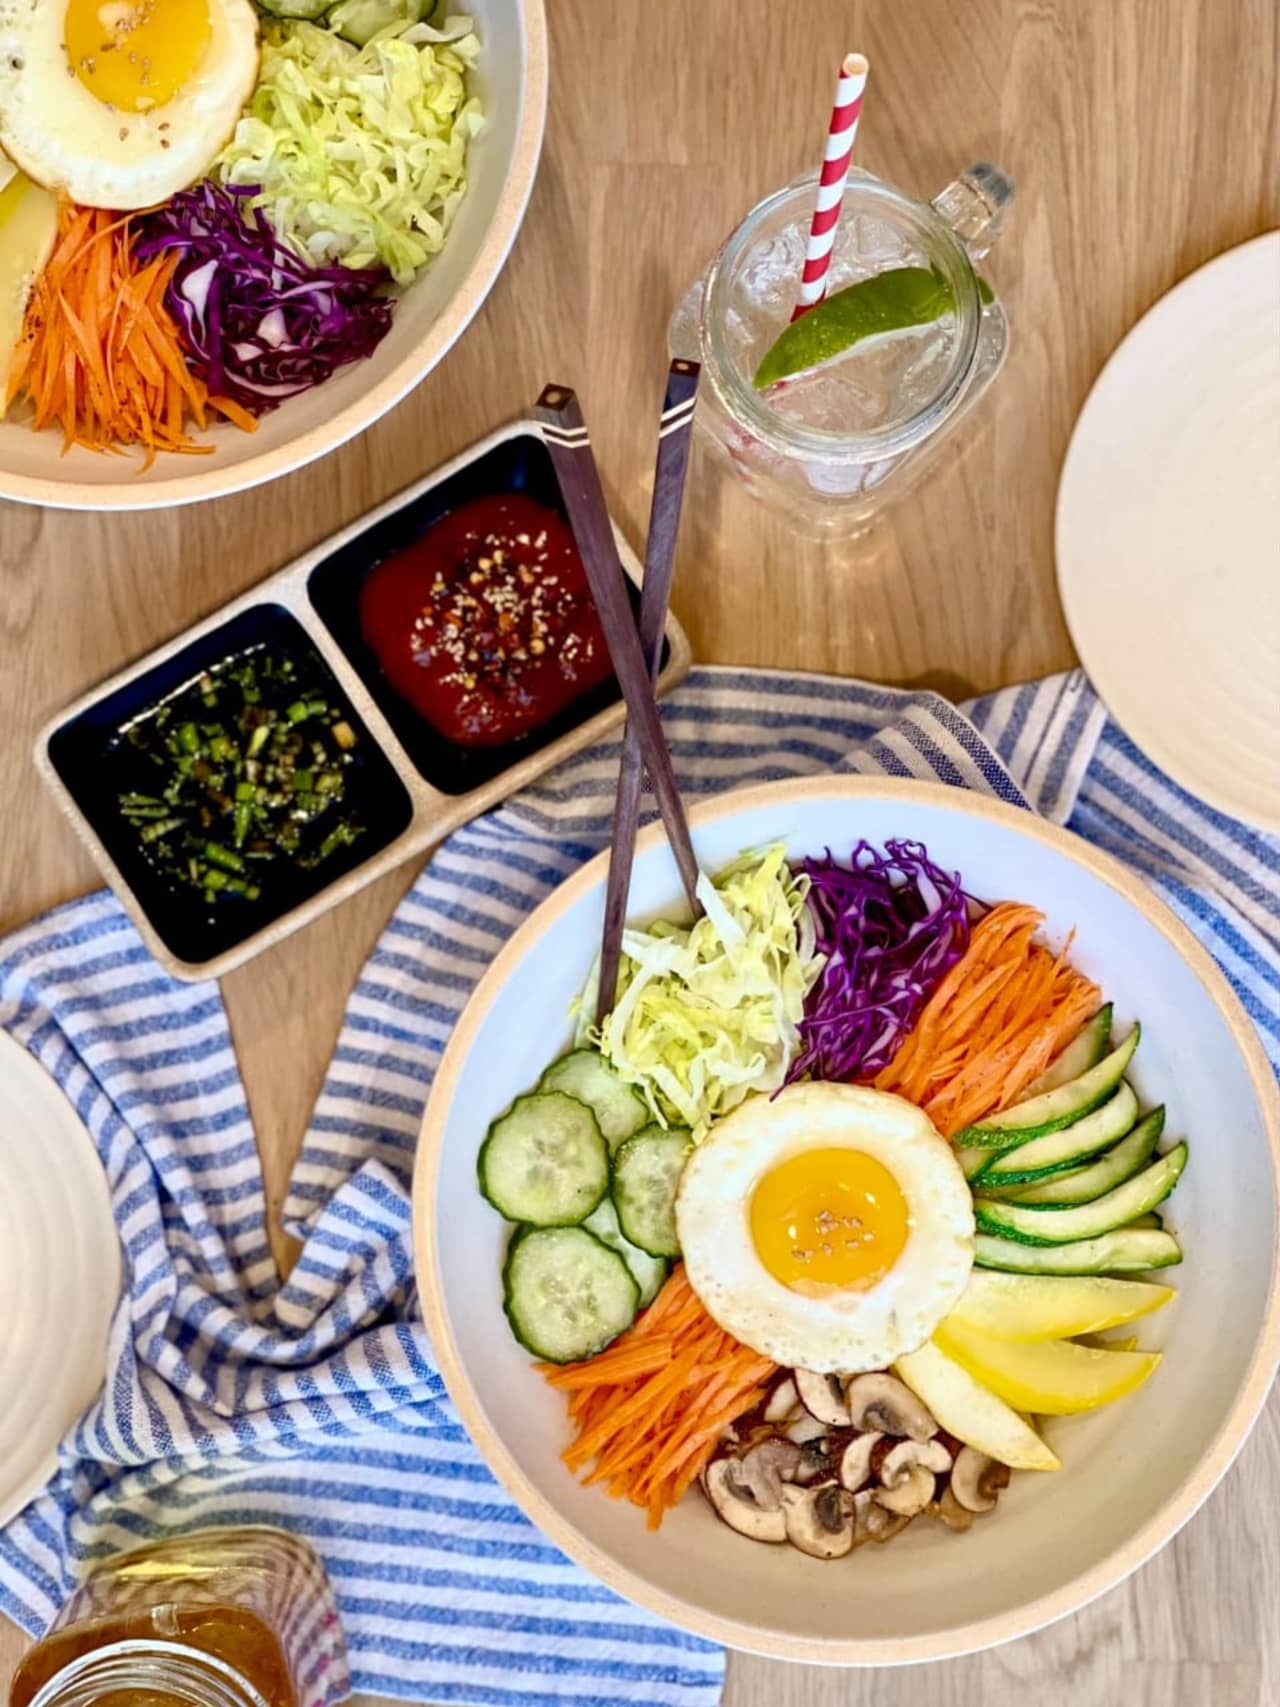 Bibimbap ("A traditional Korean rice recipe with seasonal vegetables in a mixed bowl and special dressing.")